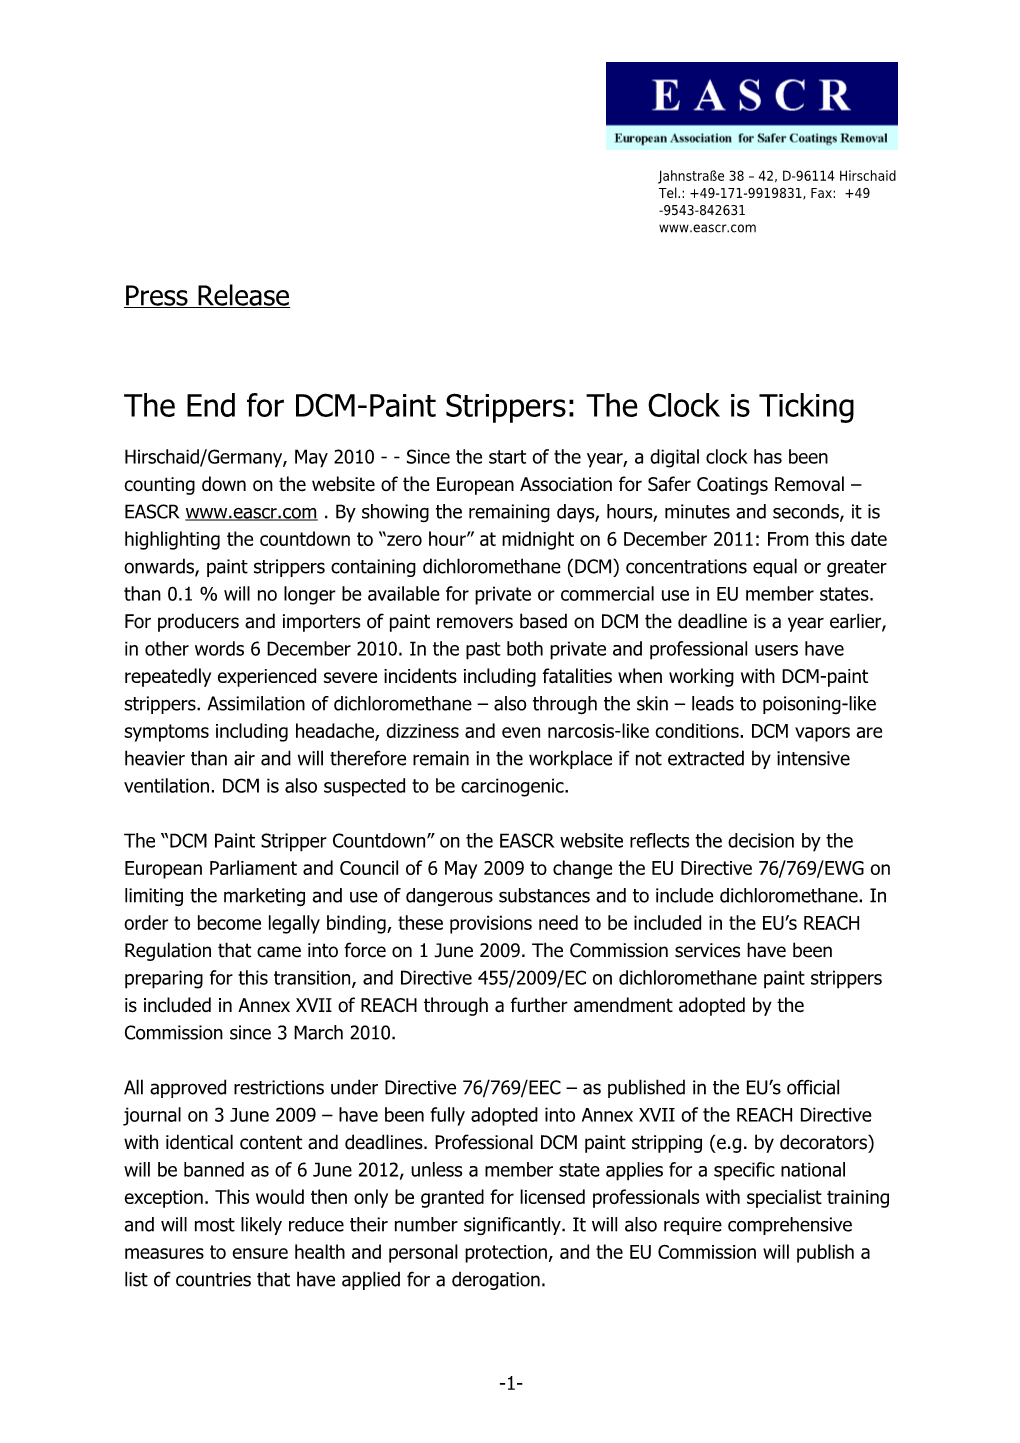 The End for DCM-Paint Strippers: the Clock Is Ticking